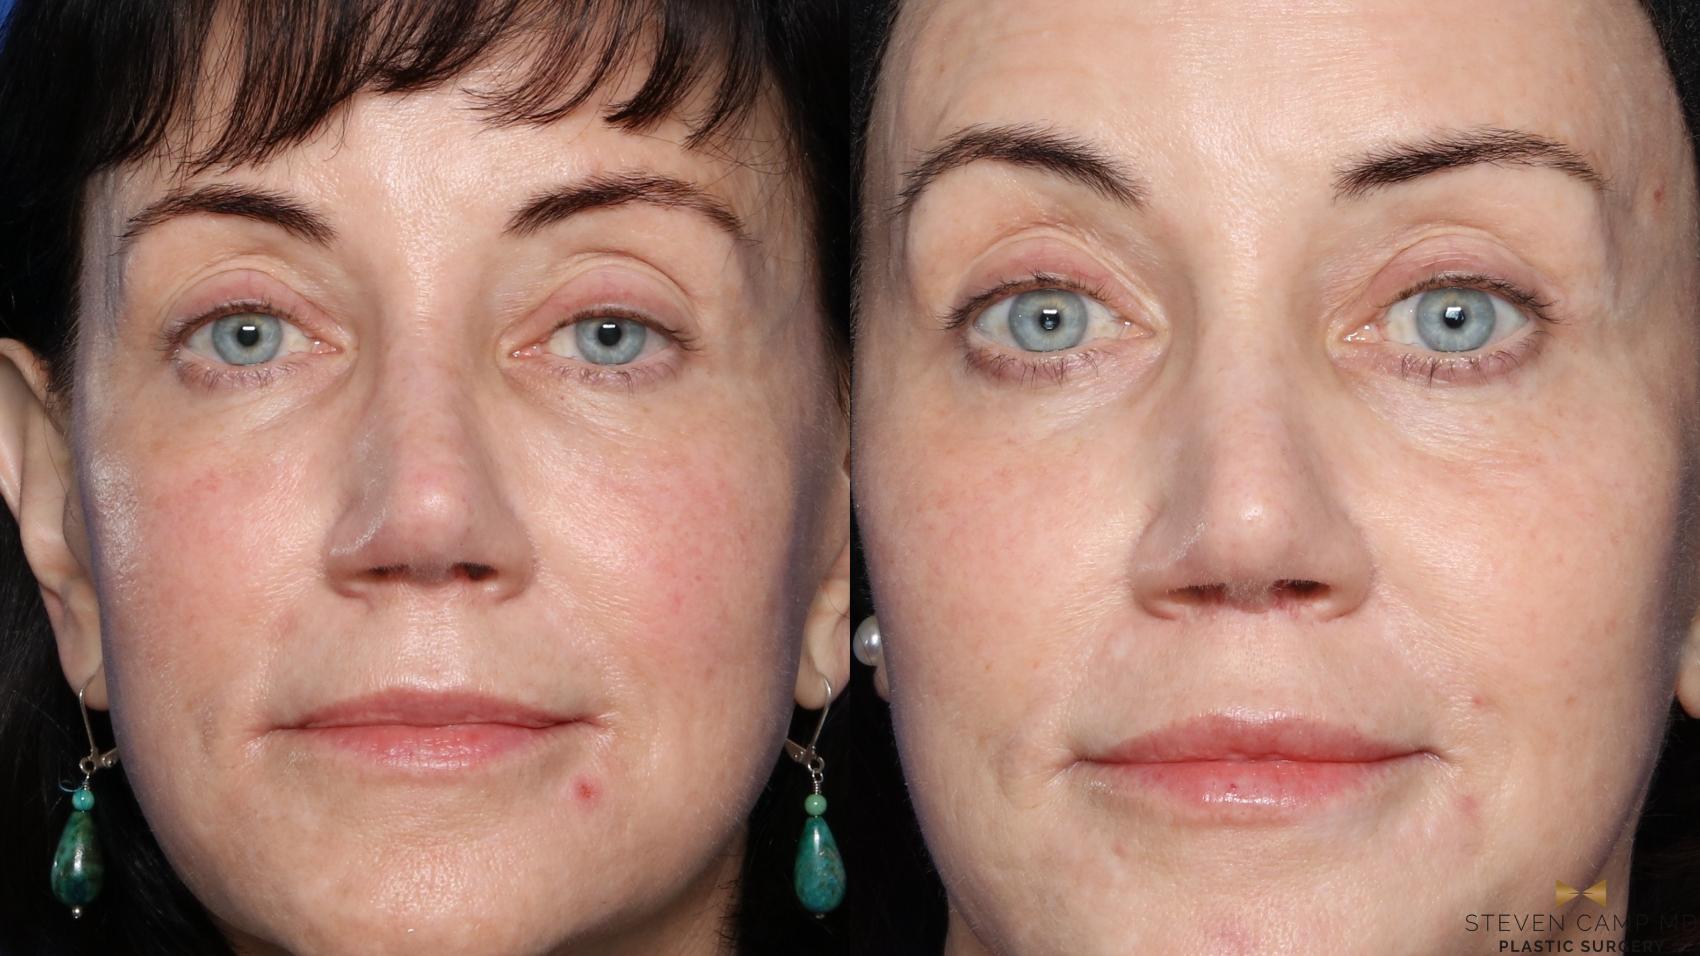 Blepharoplasty Before & After Photo | Fort Worth, Texas | Steven Camp MD Plastic Surgery